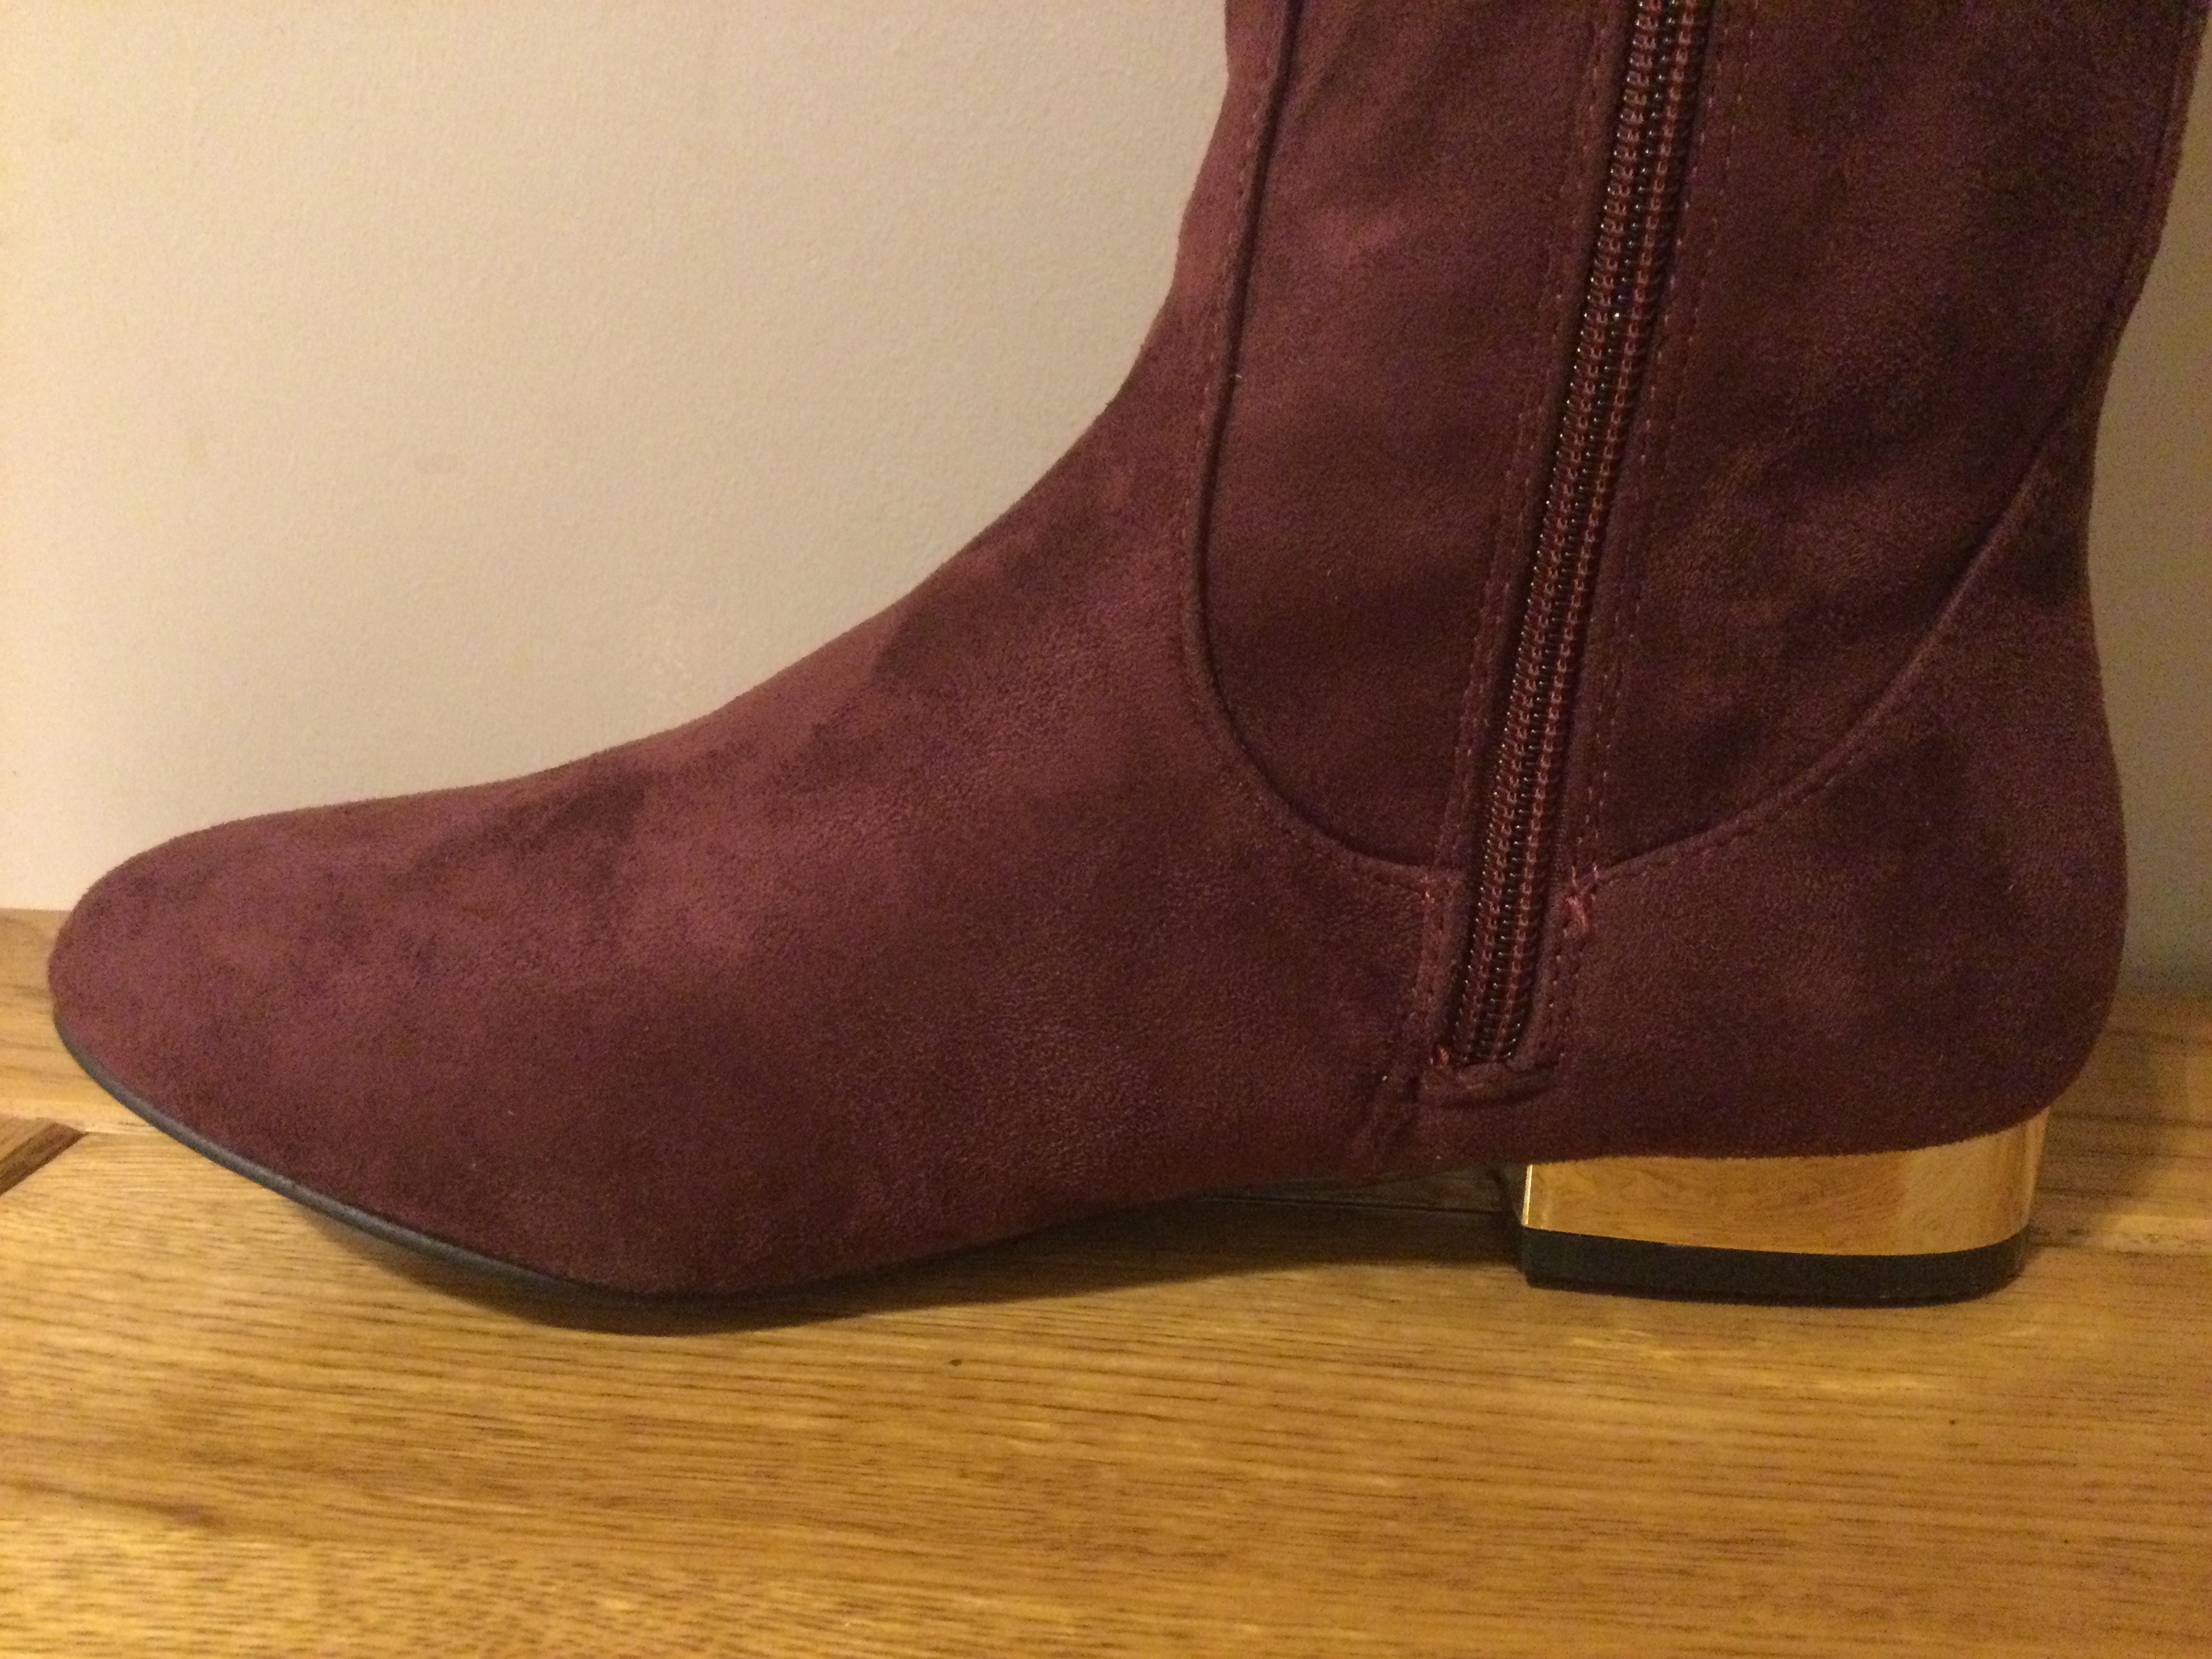 Dolcis “Katie” Long Boots, Low Block Heel, Size 5, Burgundy- New RRP £55.00 - Image 2 of 7